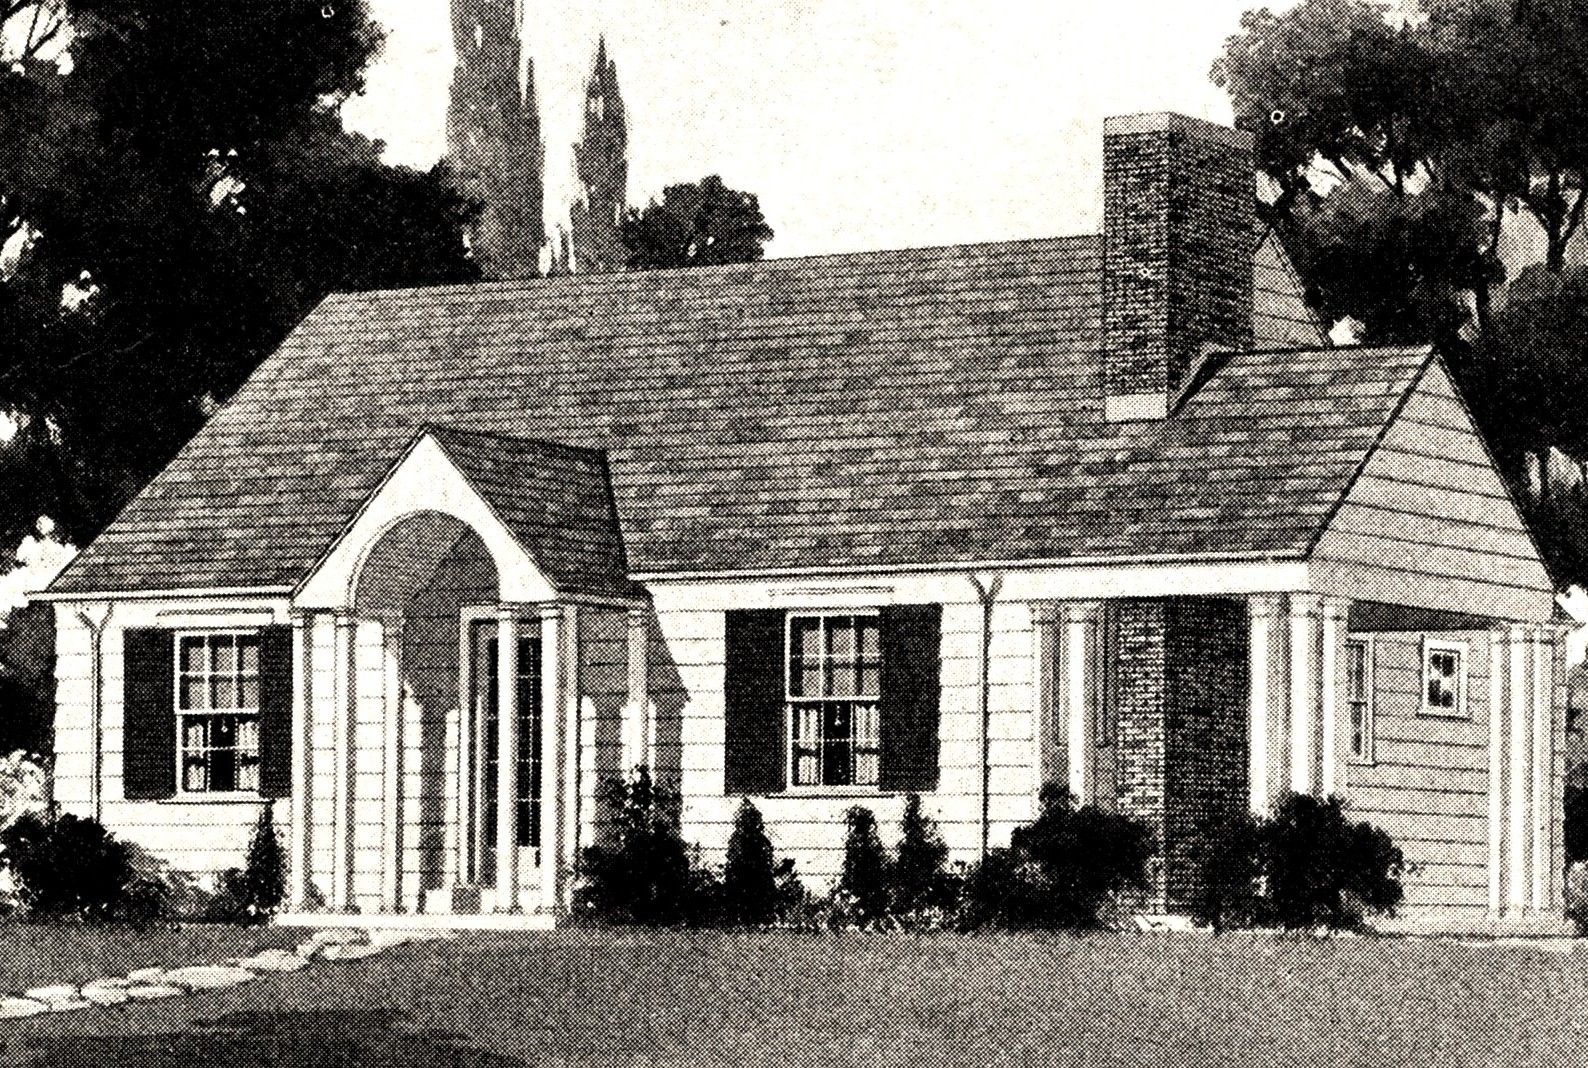 Original catalog image of the Sears (and Roebuck) Wexford (from the 1936 Sears Modern Homes catalog). 